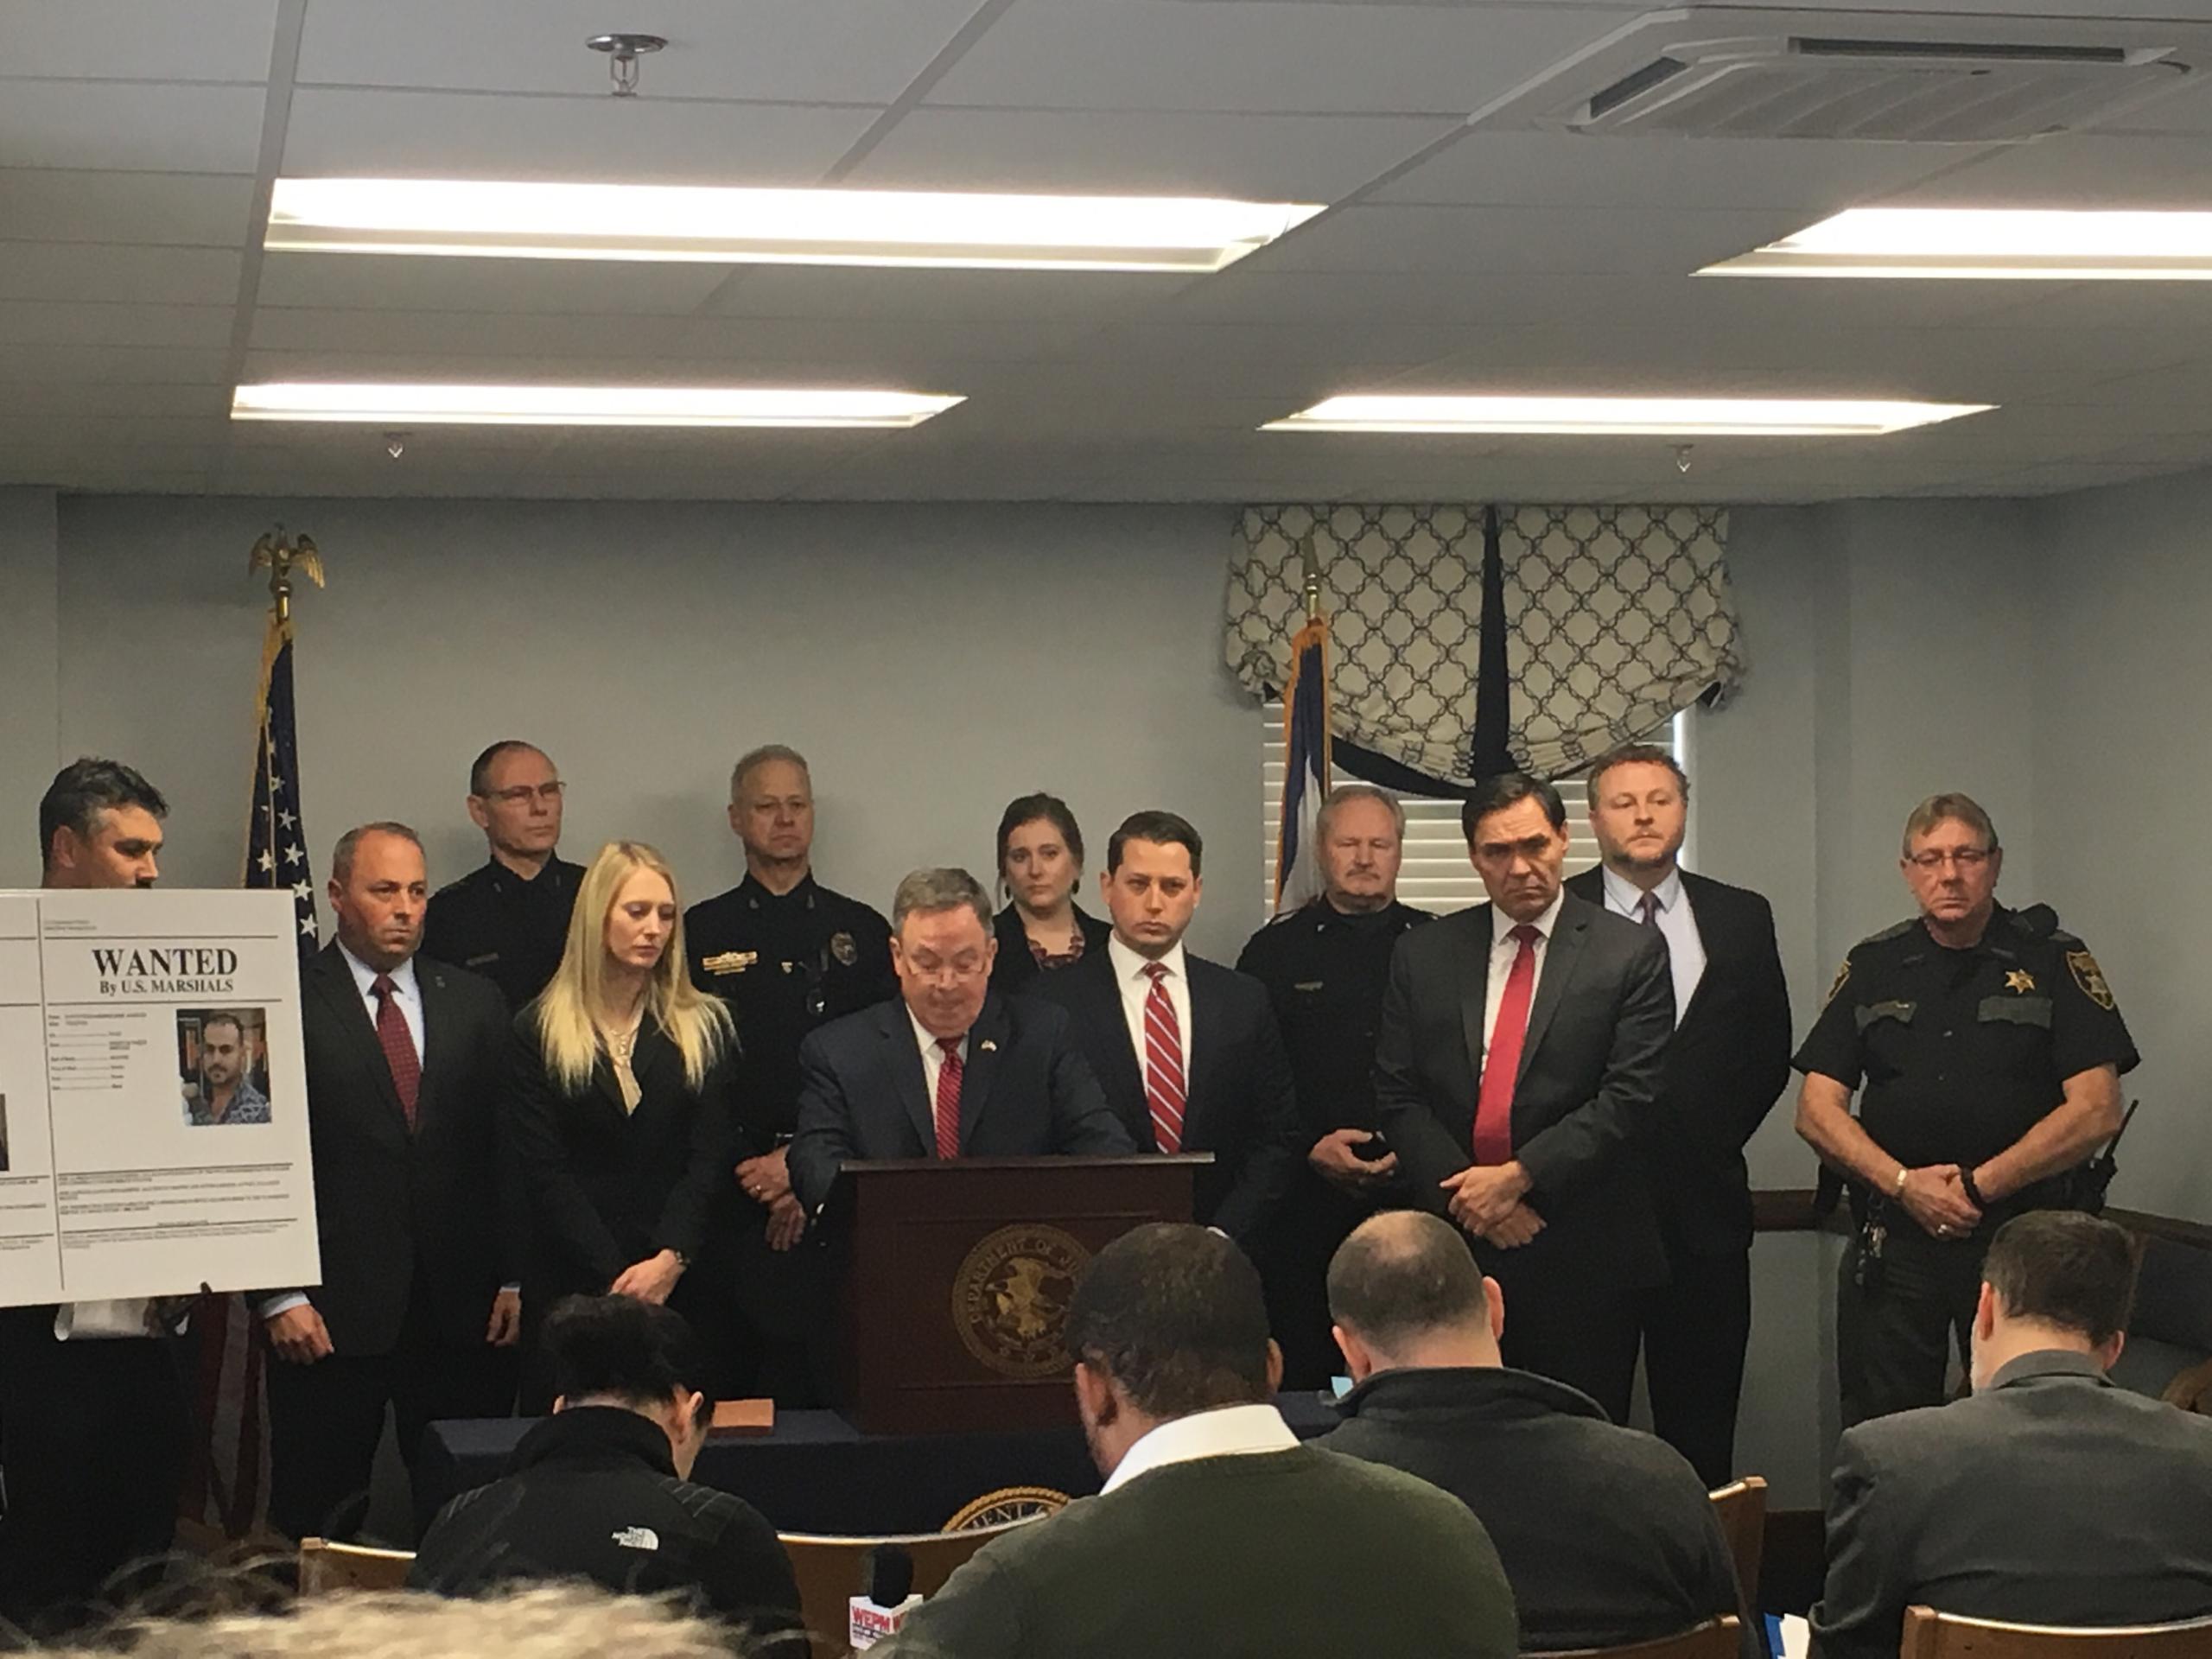 After nearly a two-year investigation into a drug trafficking operation that spanned multiple states, 10 people (including two MS-13 gang members) were indicted on a variety of federal charges.